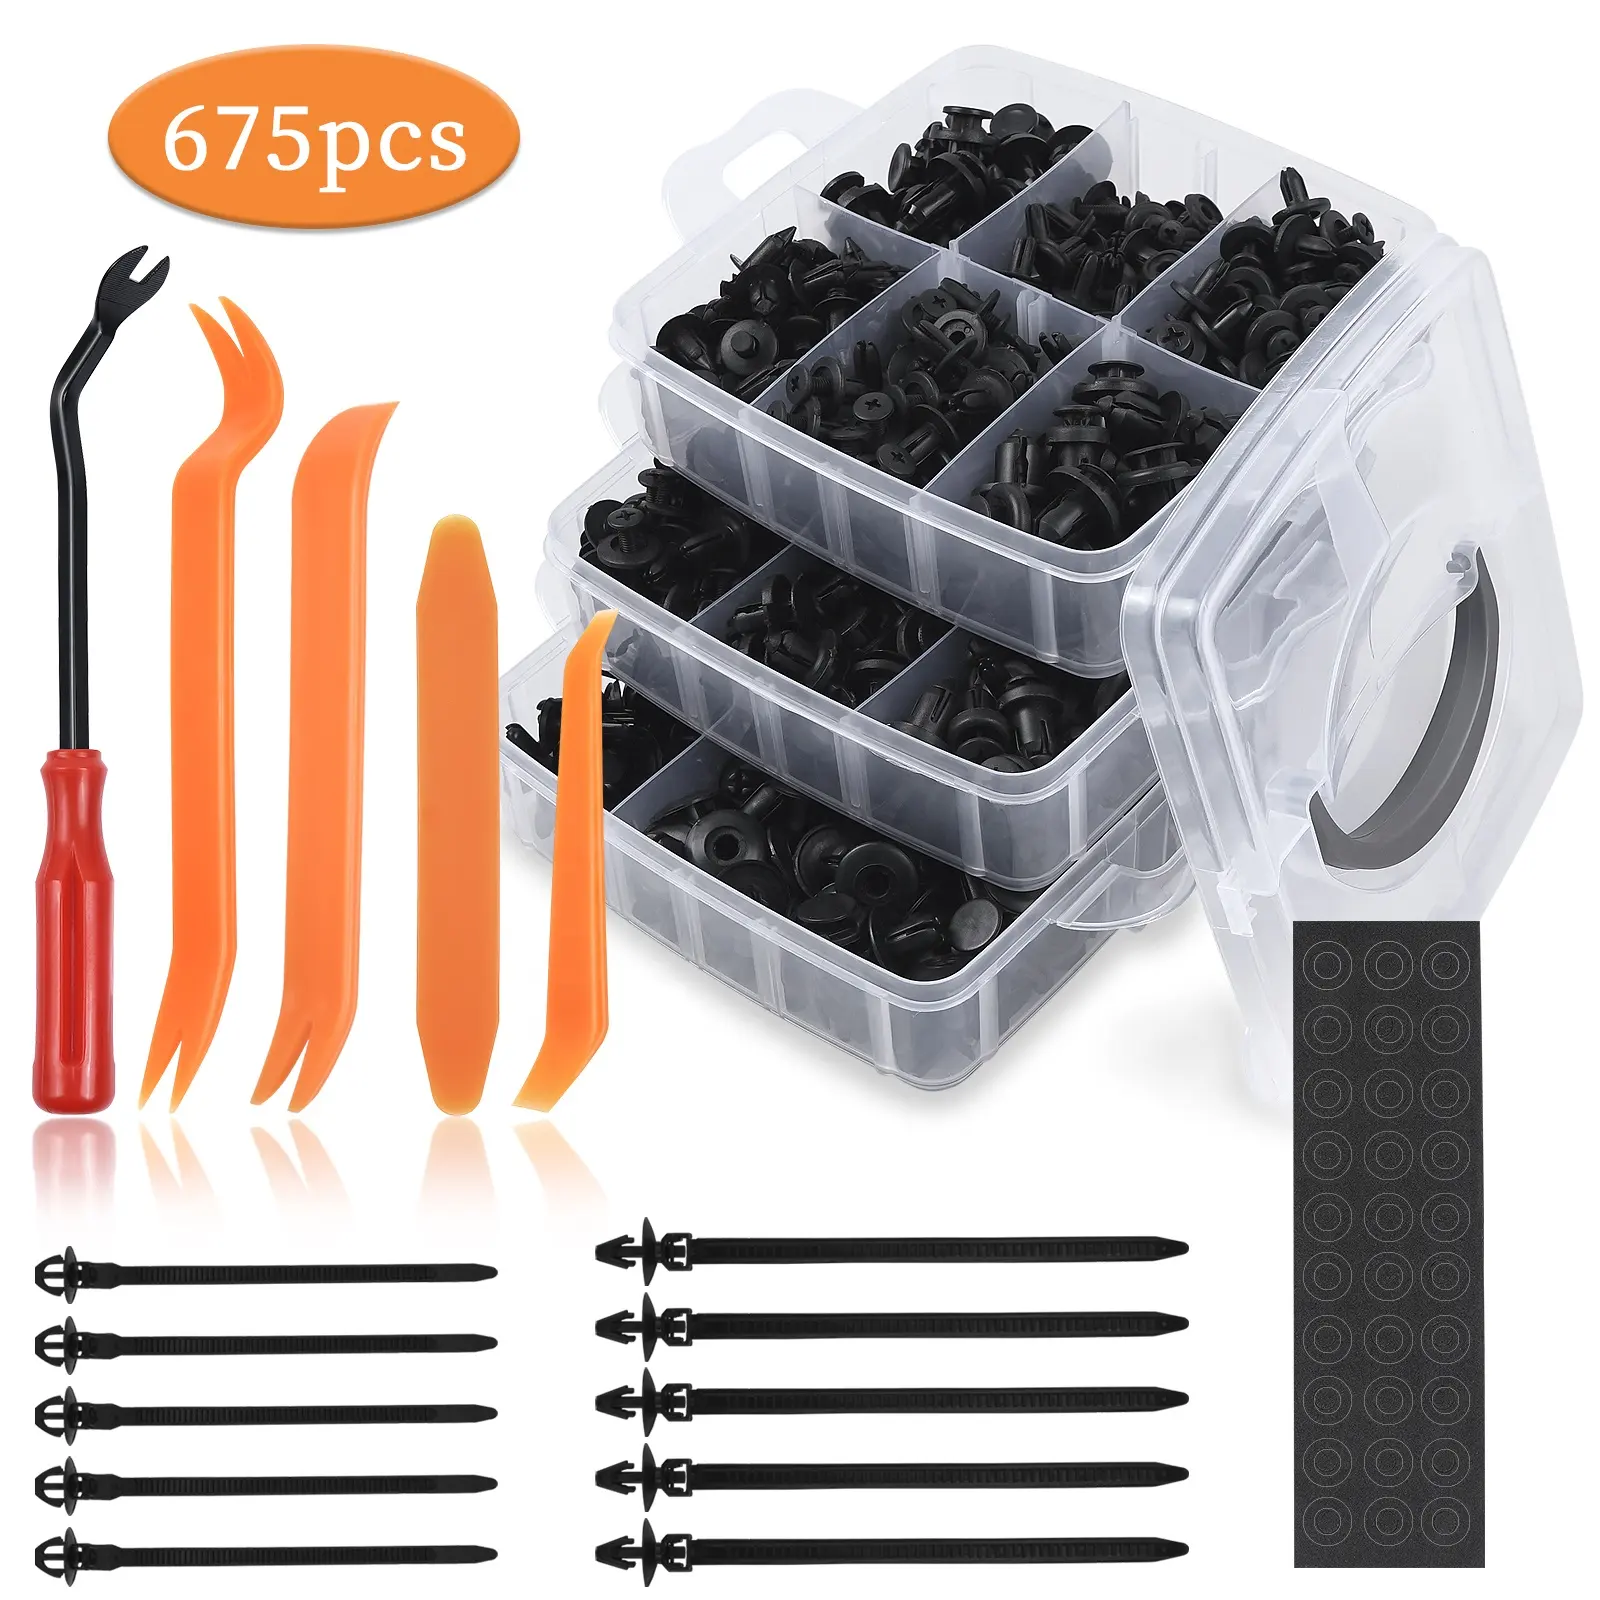 675PCS Car Retainer Clips Kit Nylon Bumper Fender Rivets with Foam Cable Ties and Fasteners Remover